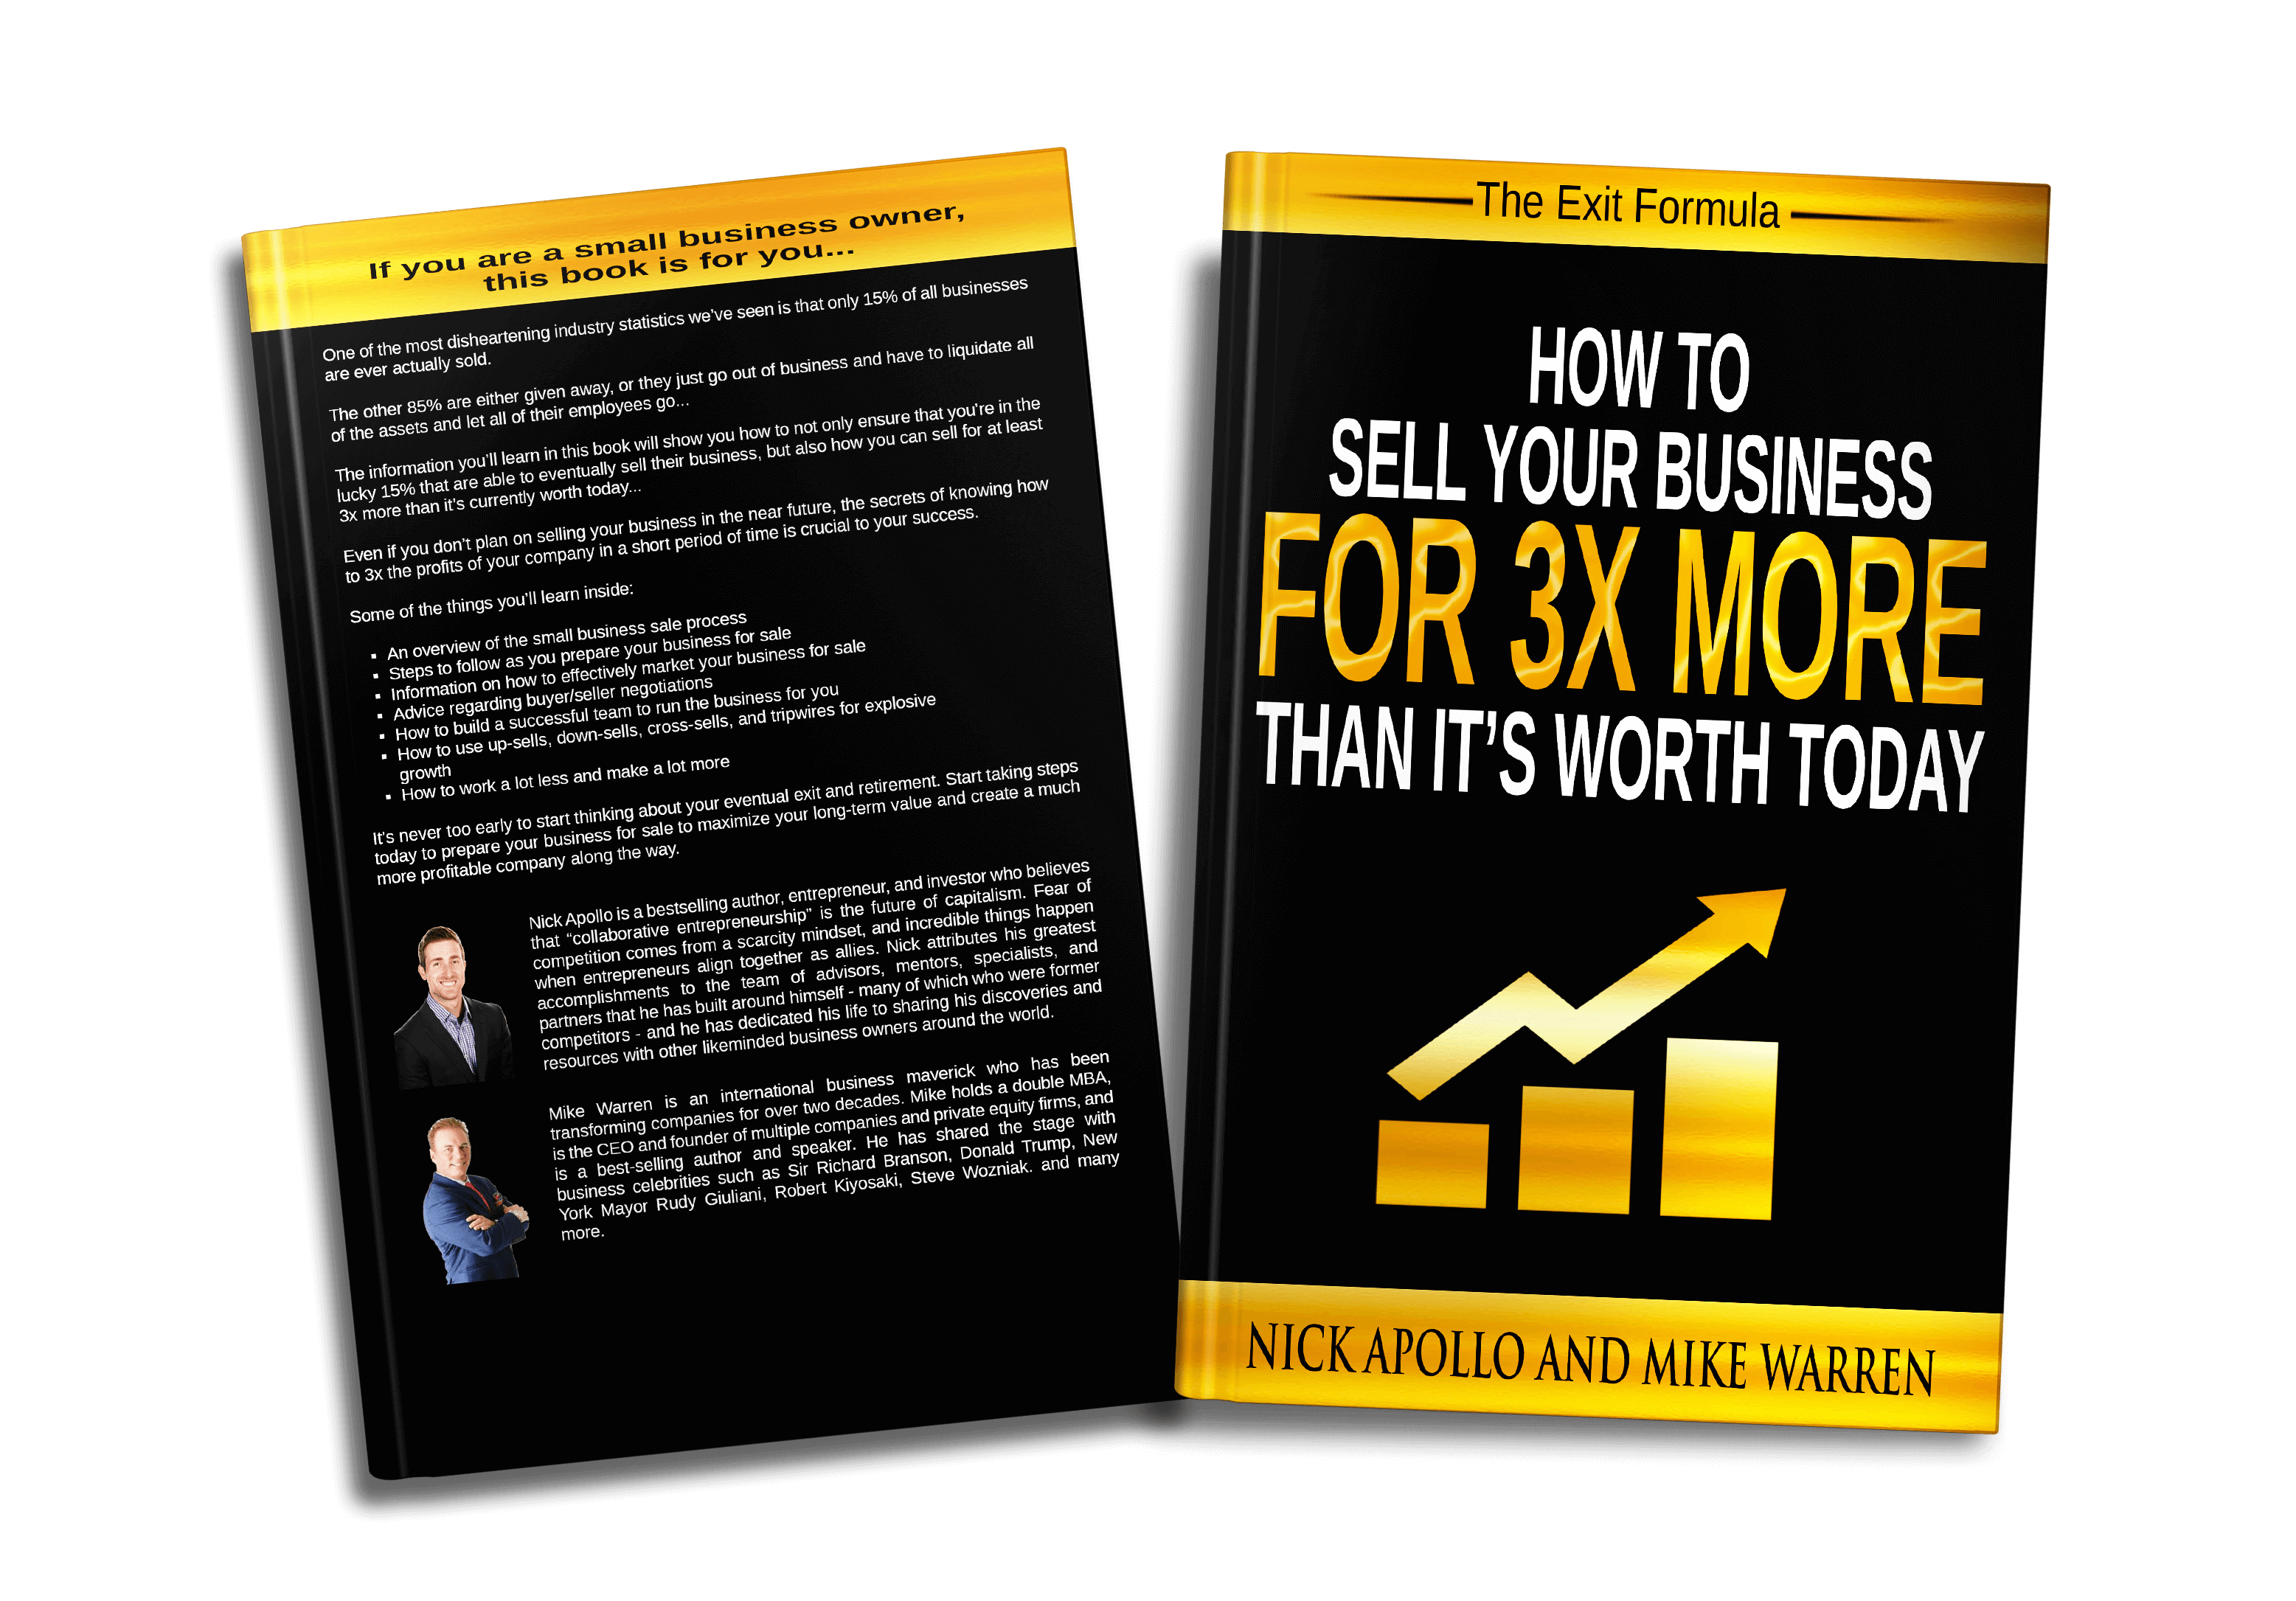 How To Sell Your Business For 3x More Than It's Worth Today - Free Book Giveaway with Complimentary Coaching Call